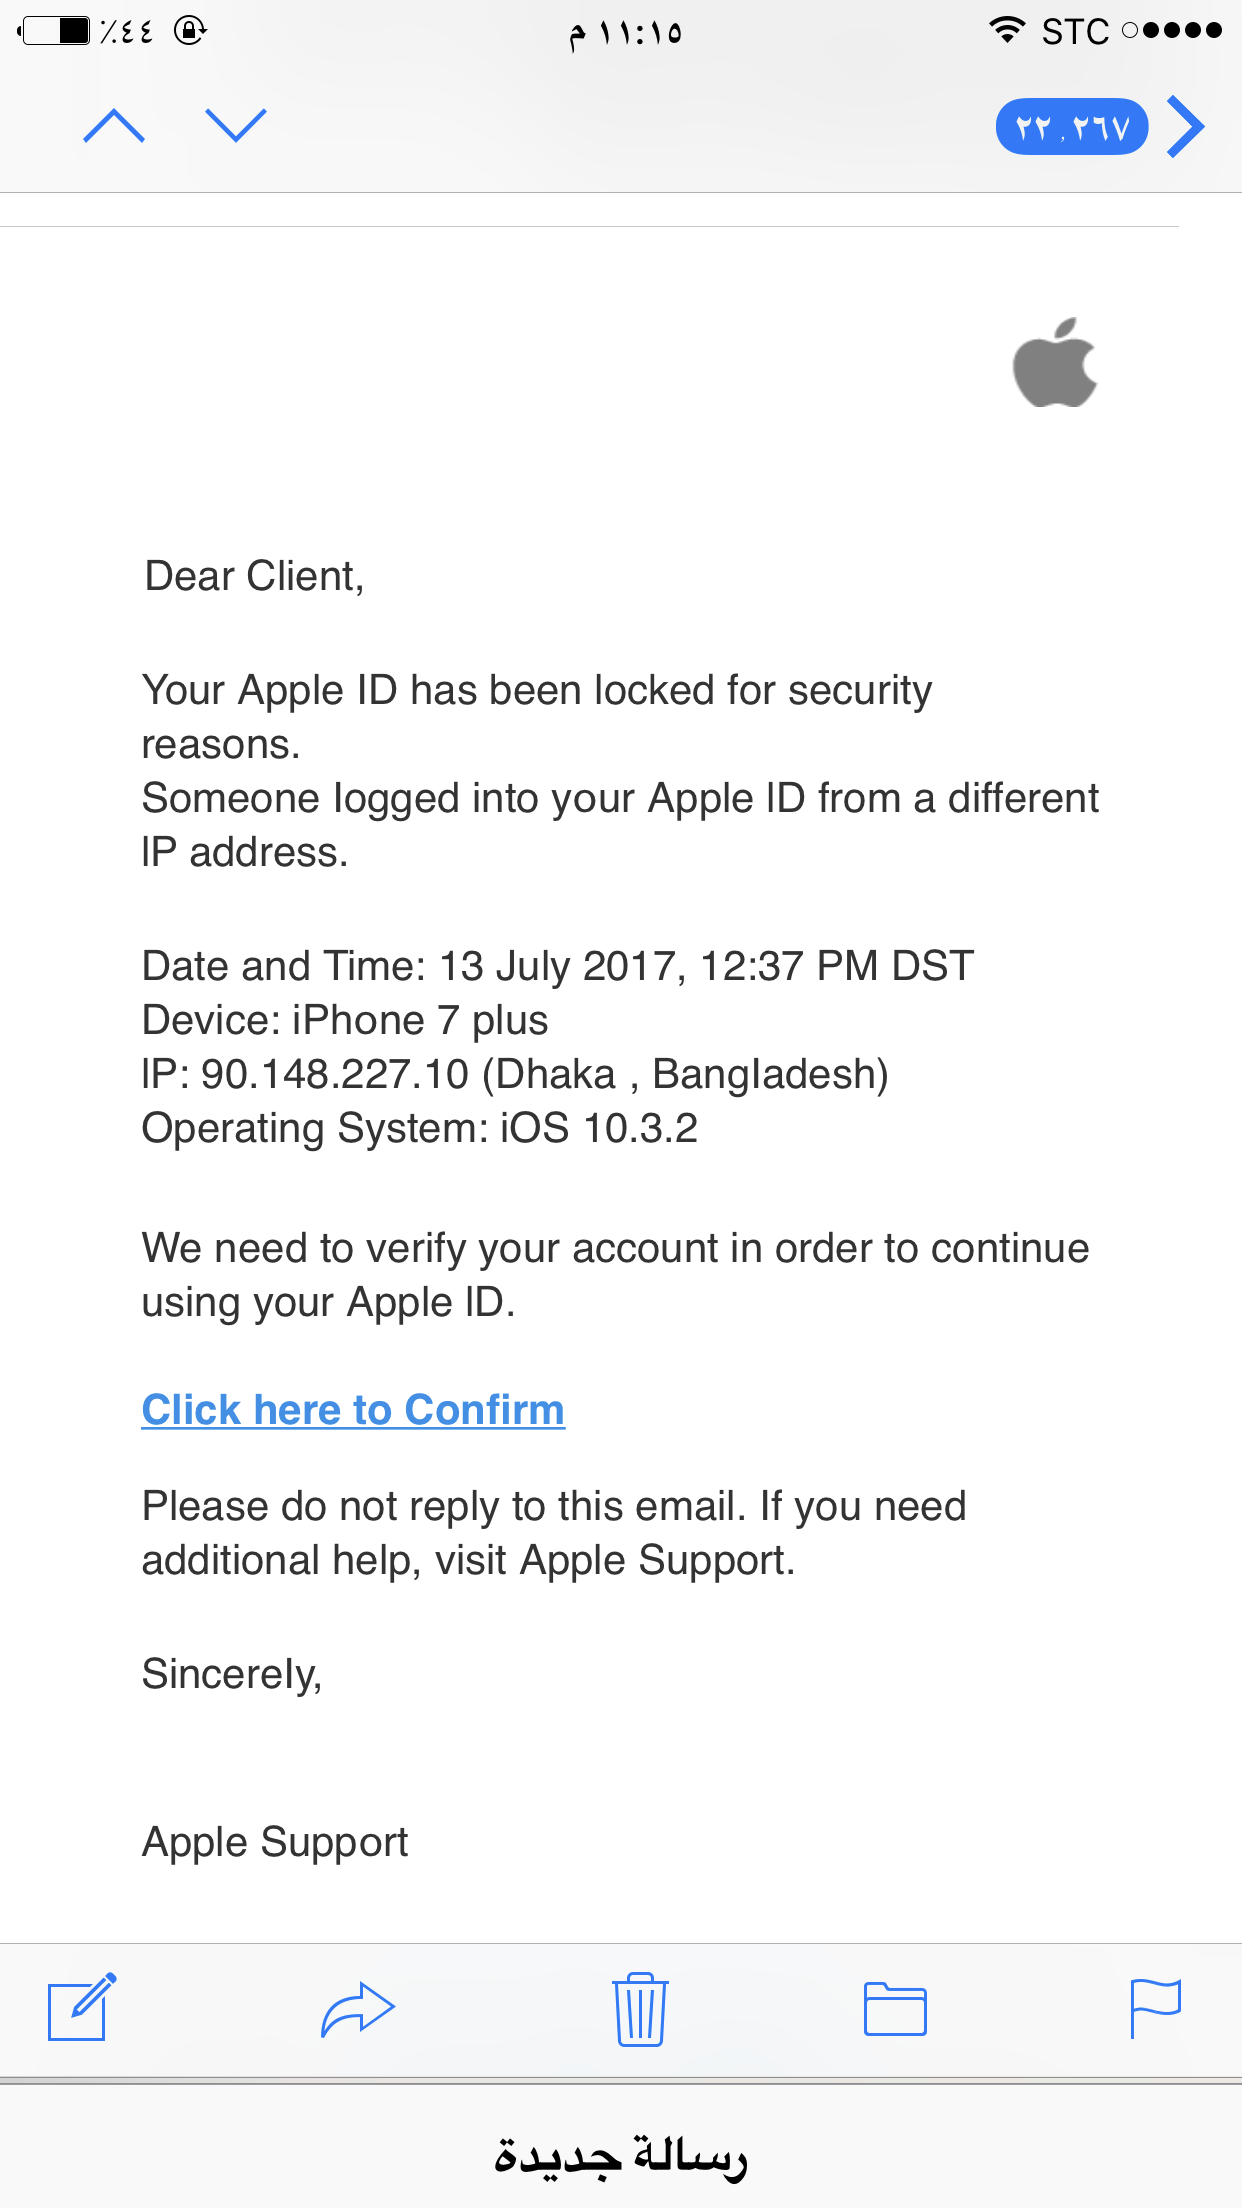 Apple support email